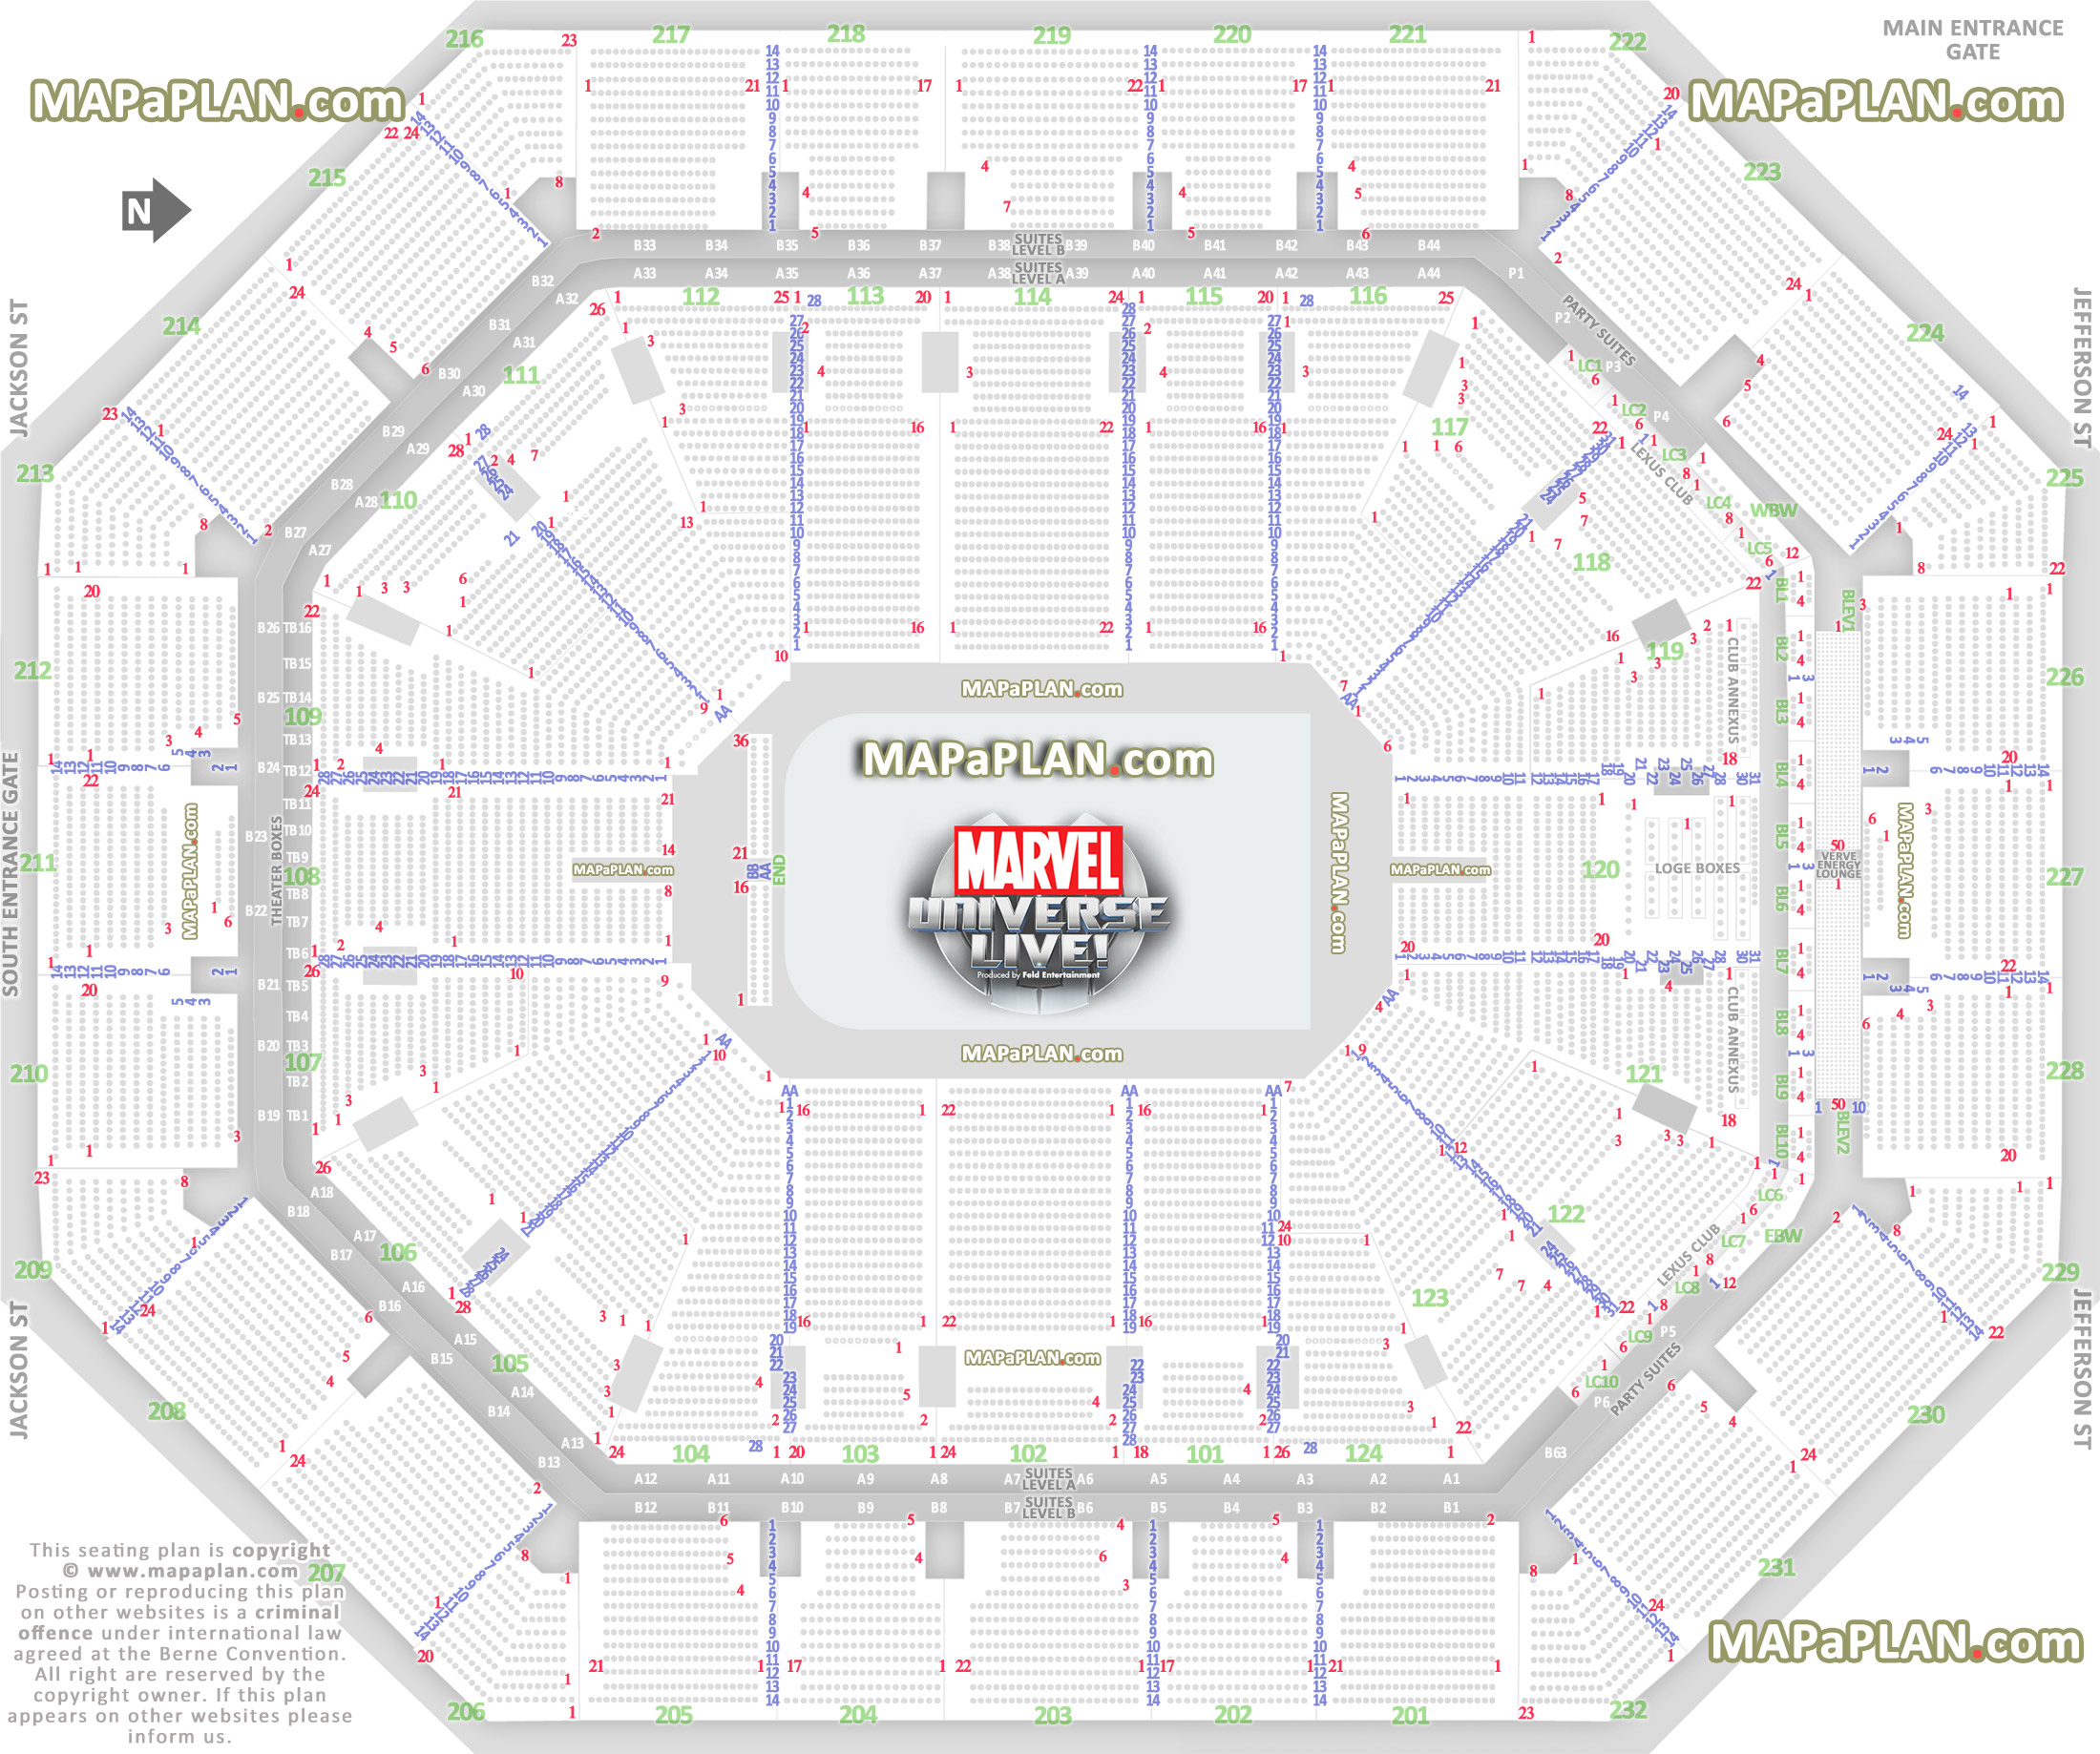 marvel universe live new show interactive balcony best seat selection arrangement review diagram sro standing room only area verve energy lounge Phoenix Footprint Center Arena seating chart